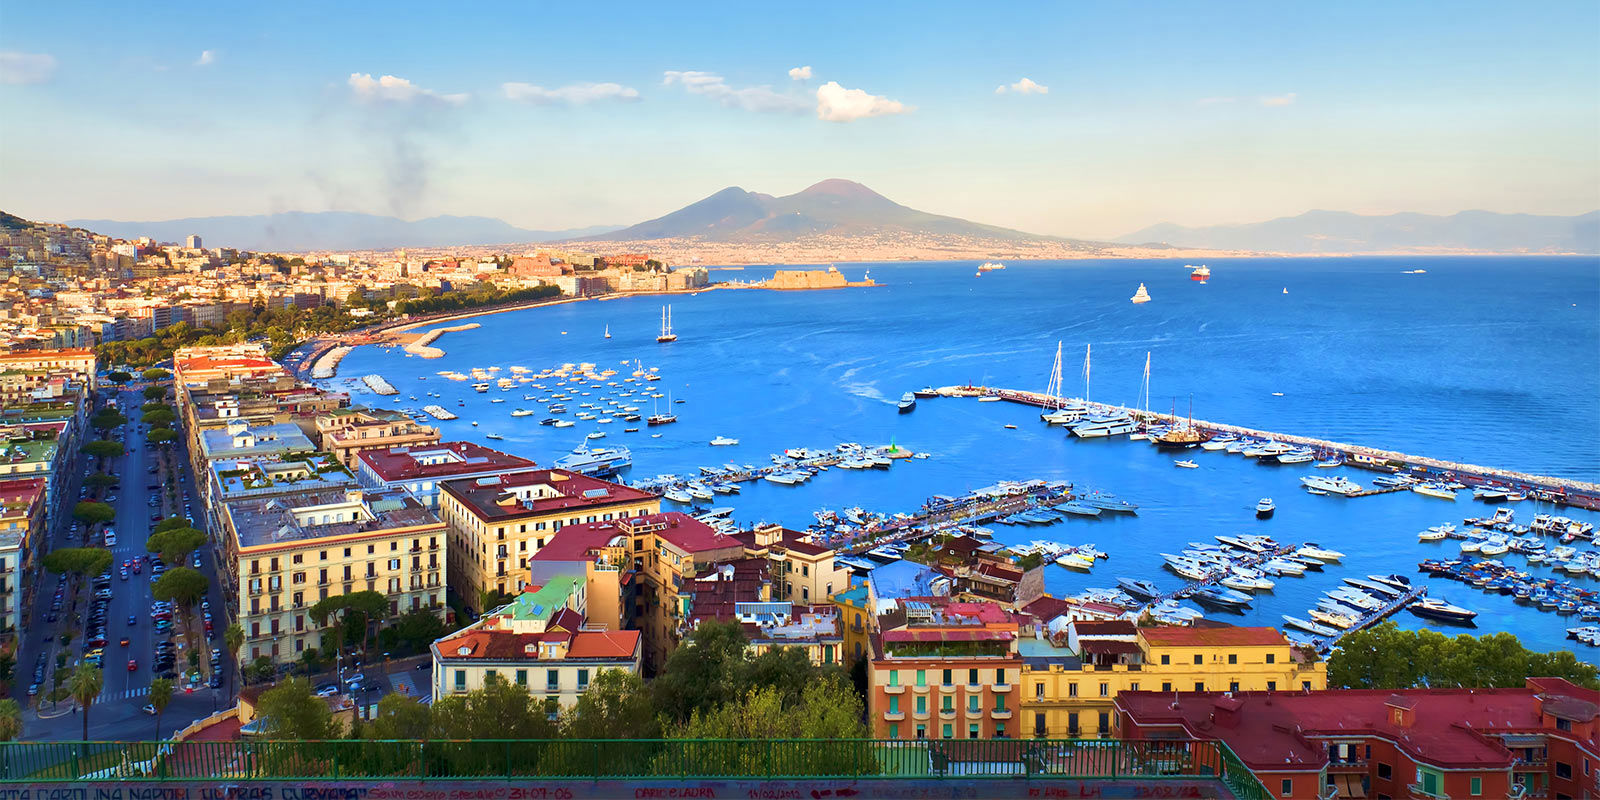 LHP Suite Napoli - Central Naples Holiday Rentals 4